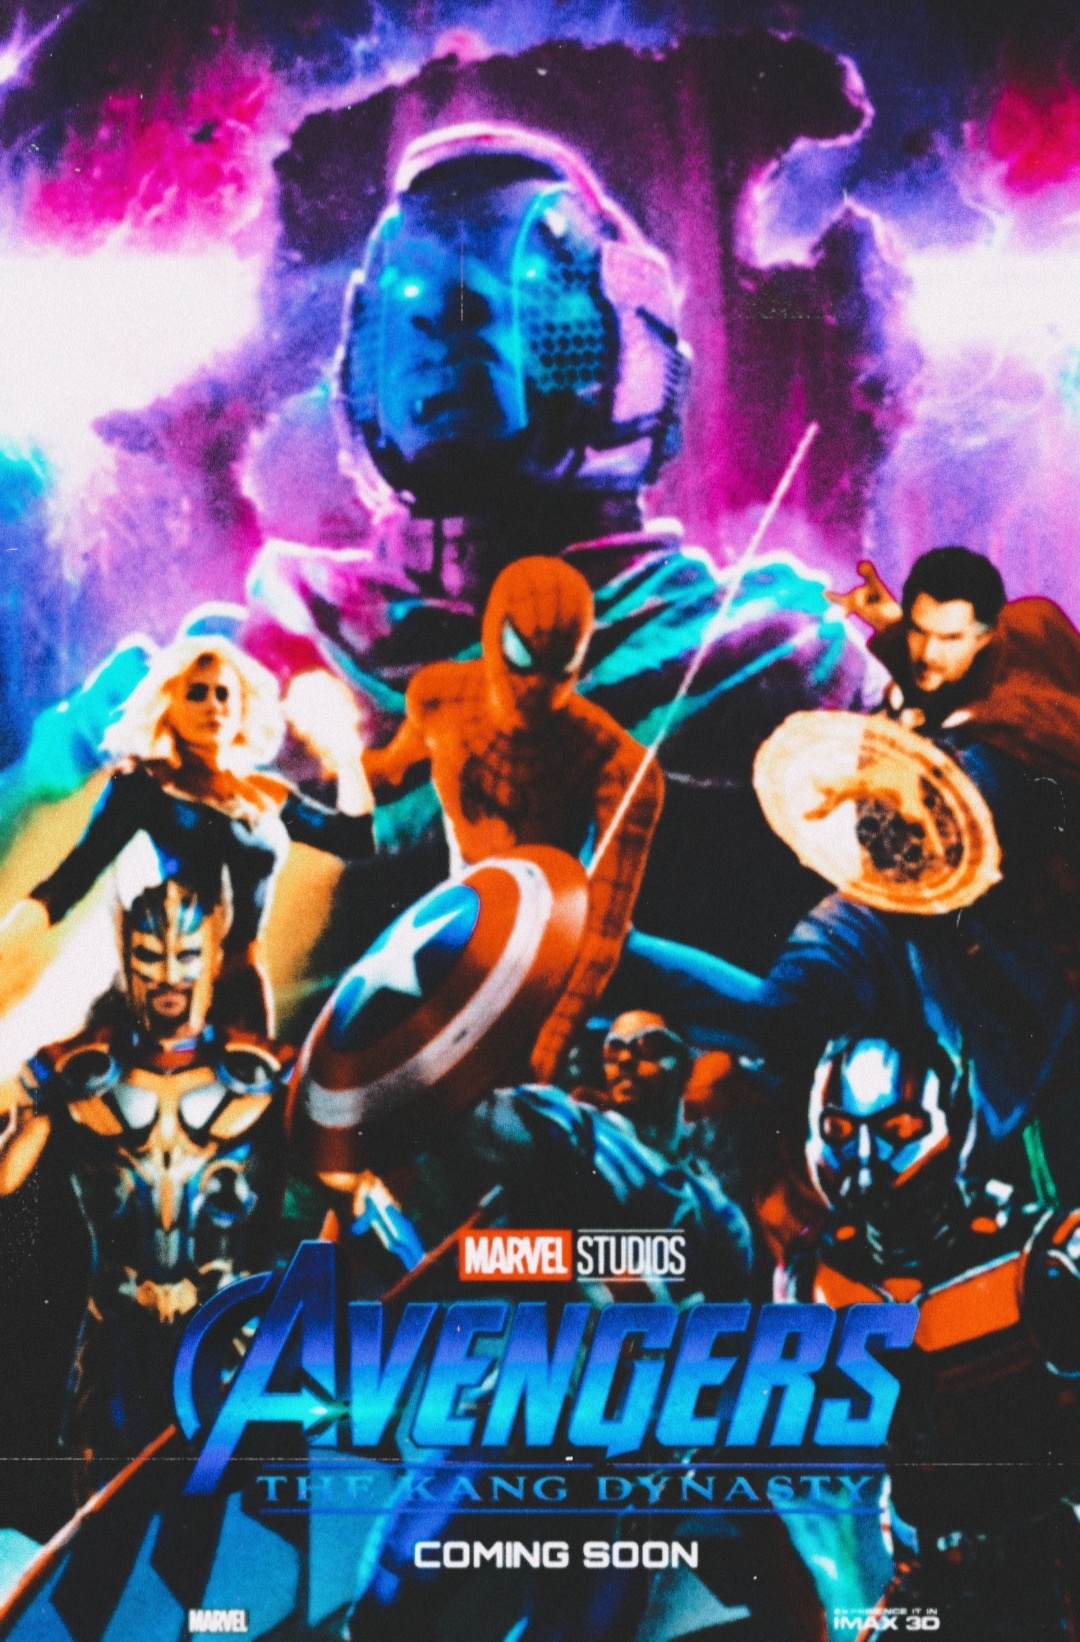 I made a poster for Avengers: The Kang Dynasty : r/marvelstudios